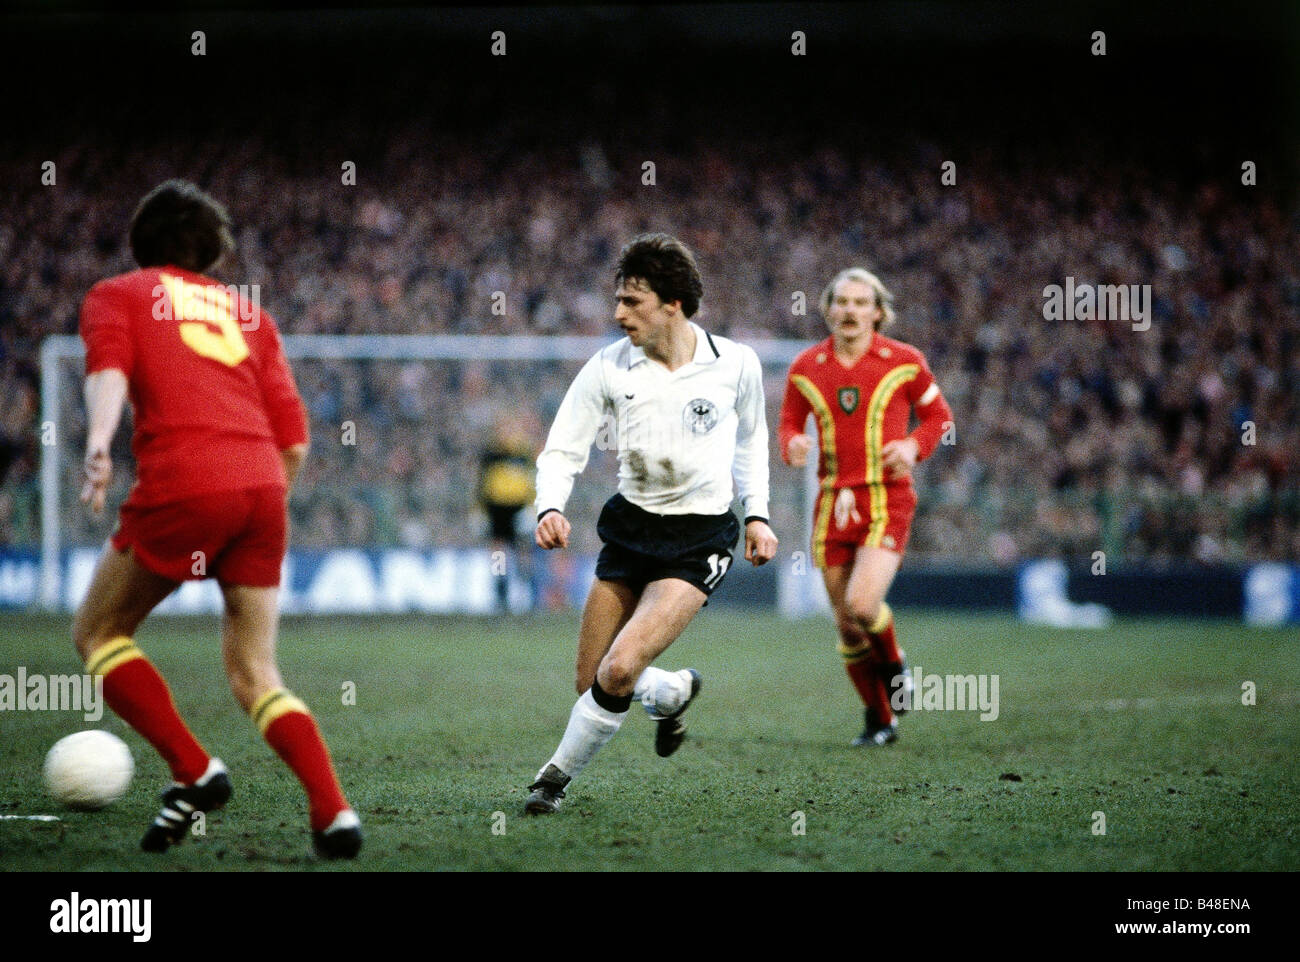 Sport / Sports, soccer, football, European championship qualification, Wales against Germany in Wrexham, Wales (0:2), 2.5.1979, Stock Photo